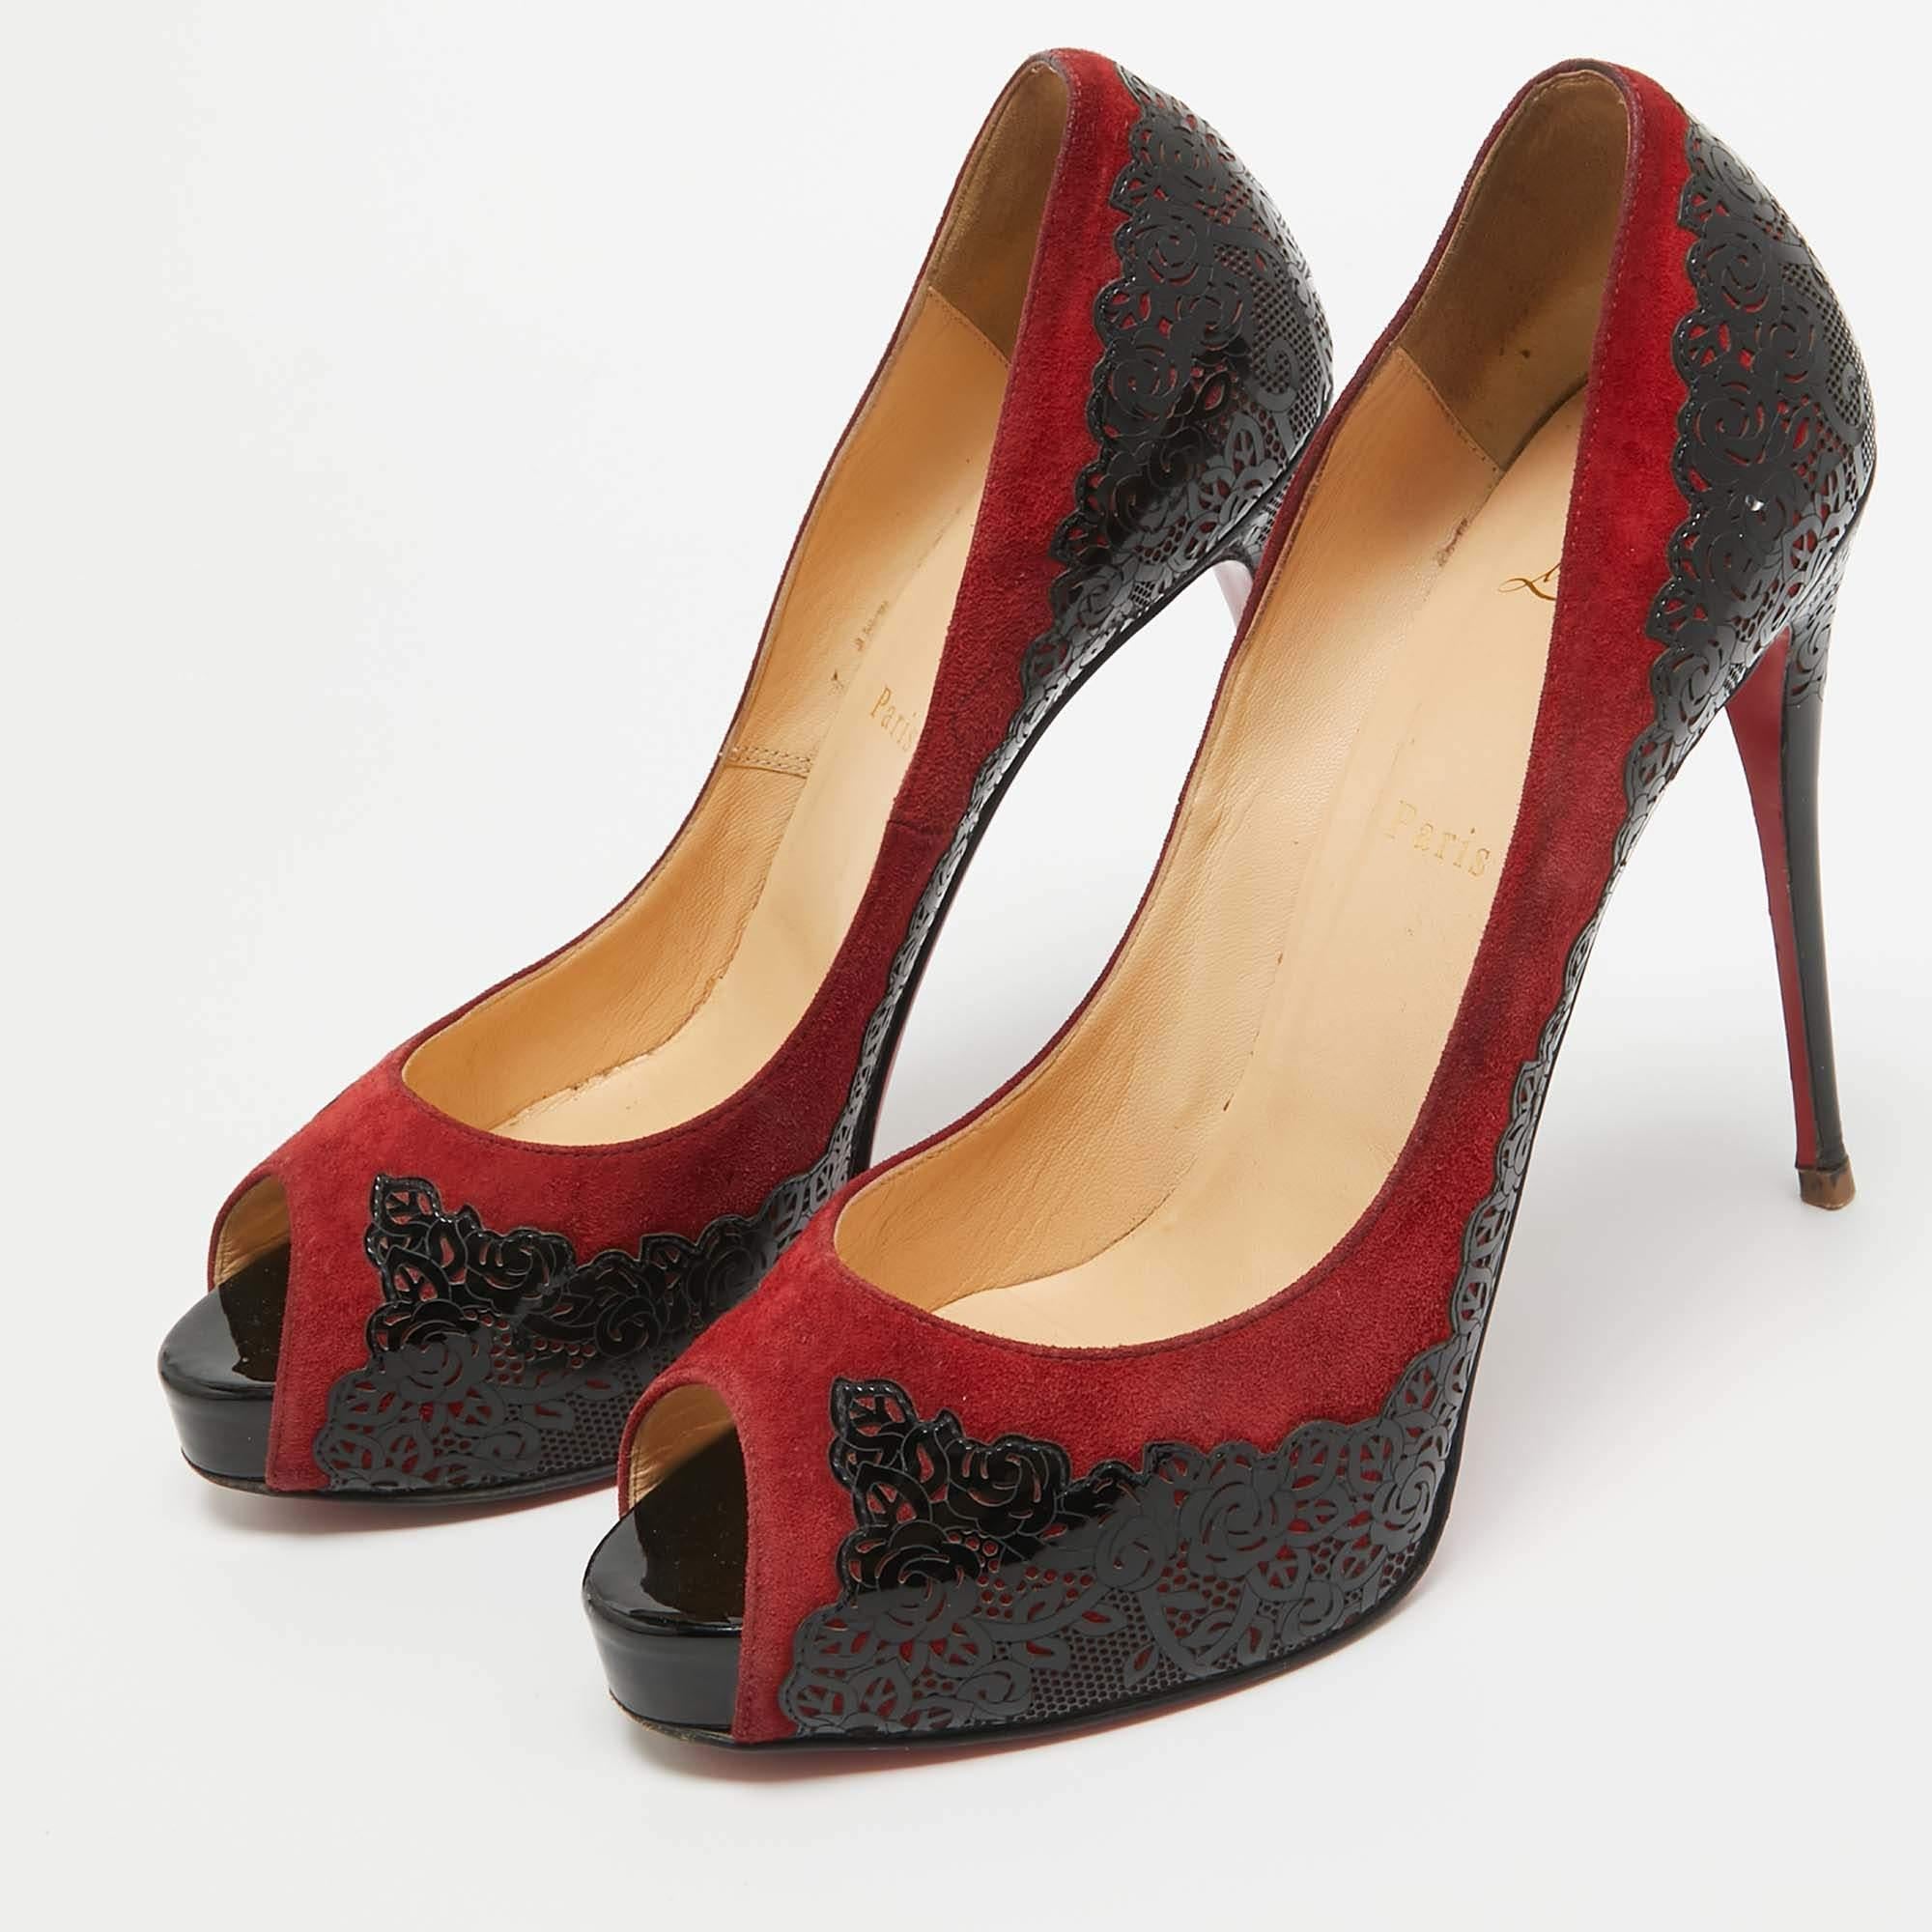 Christian Louboutin Red/Black Suede and Laser Cut Patent Veramucha Pumps Size 41 For Sale 4